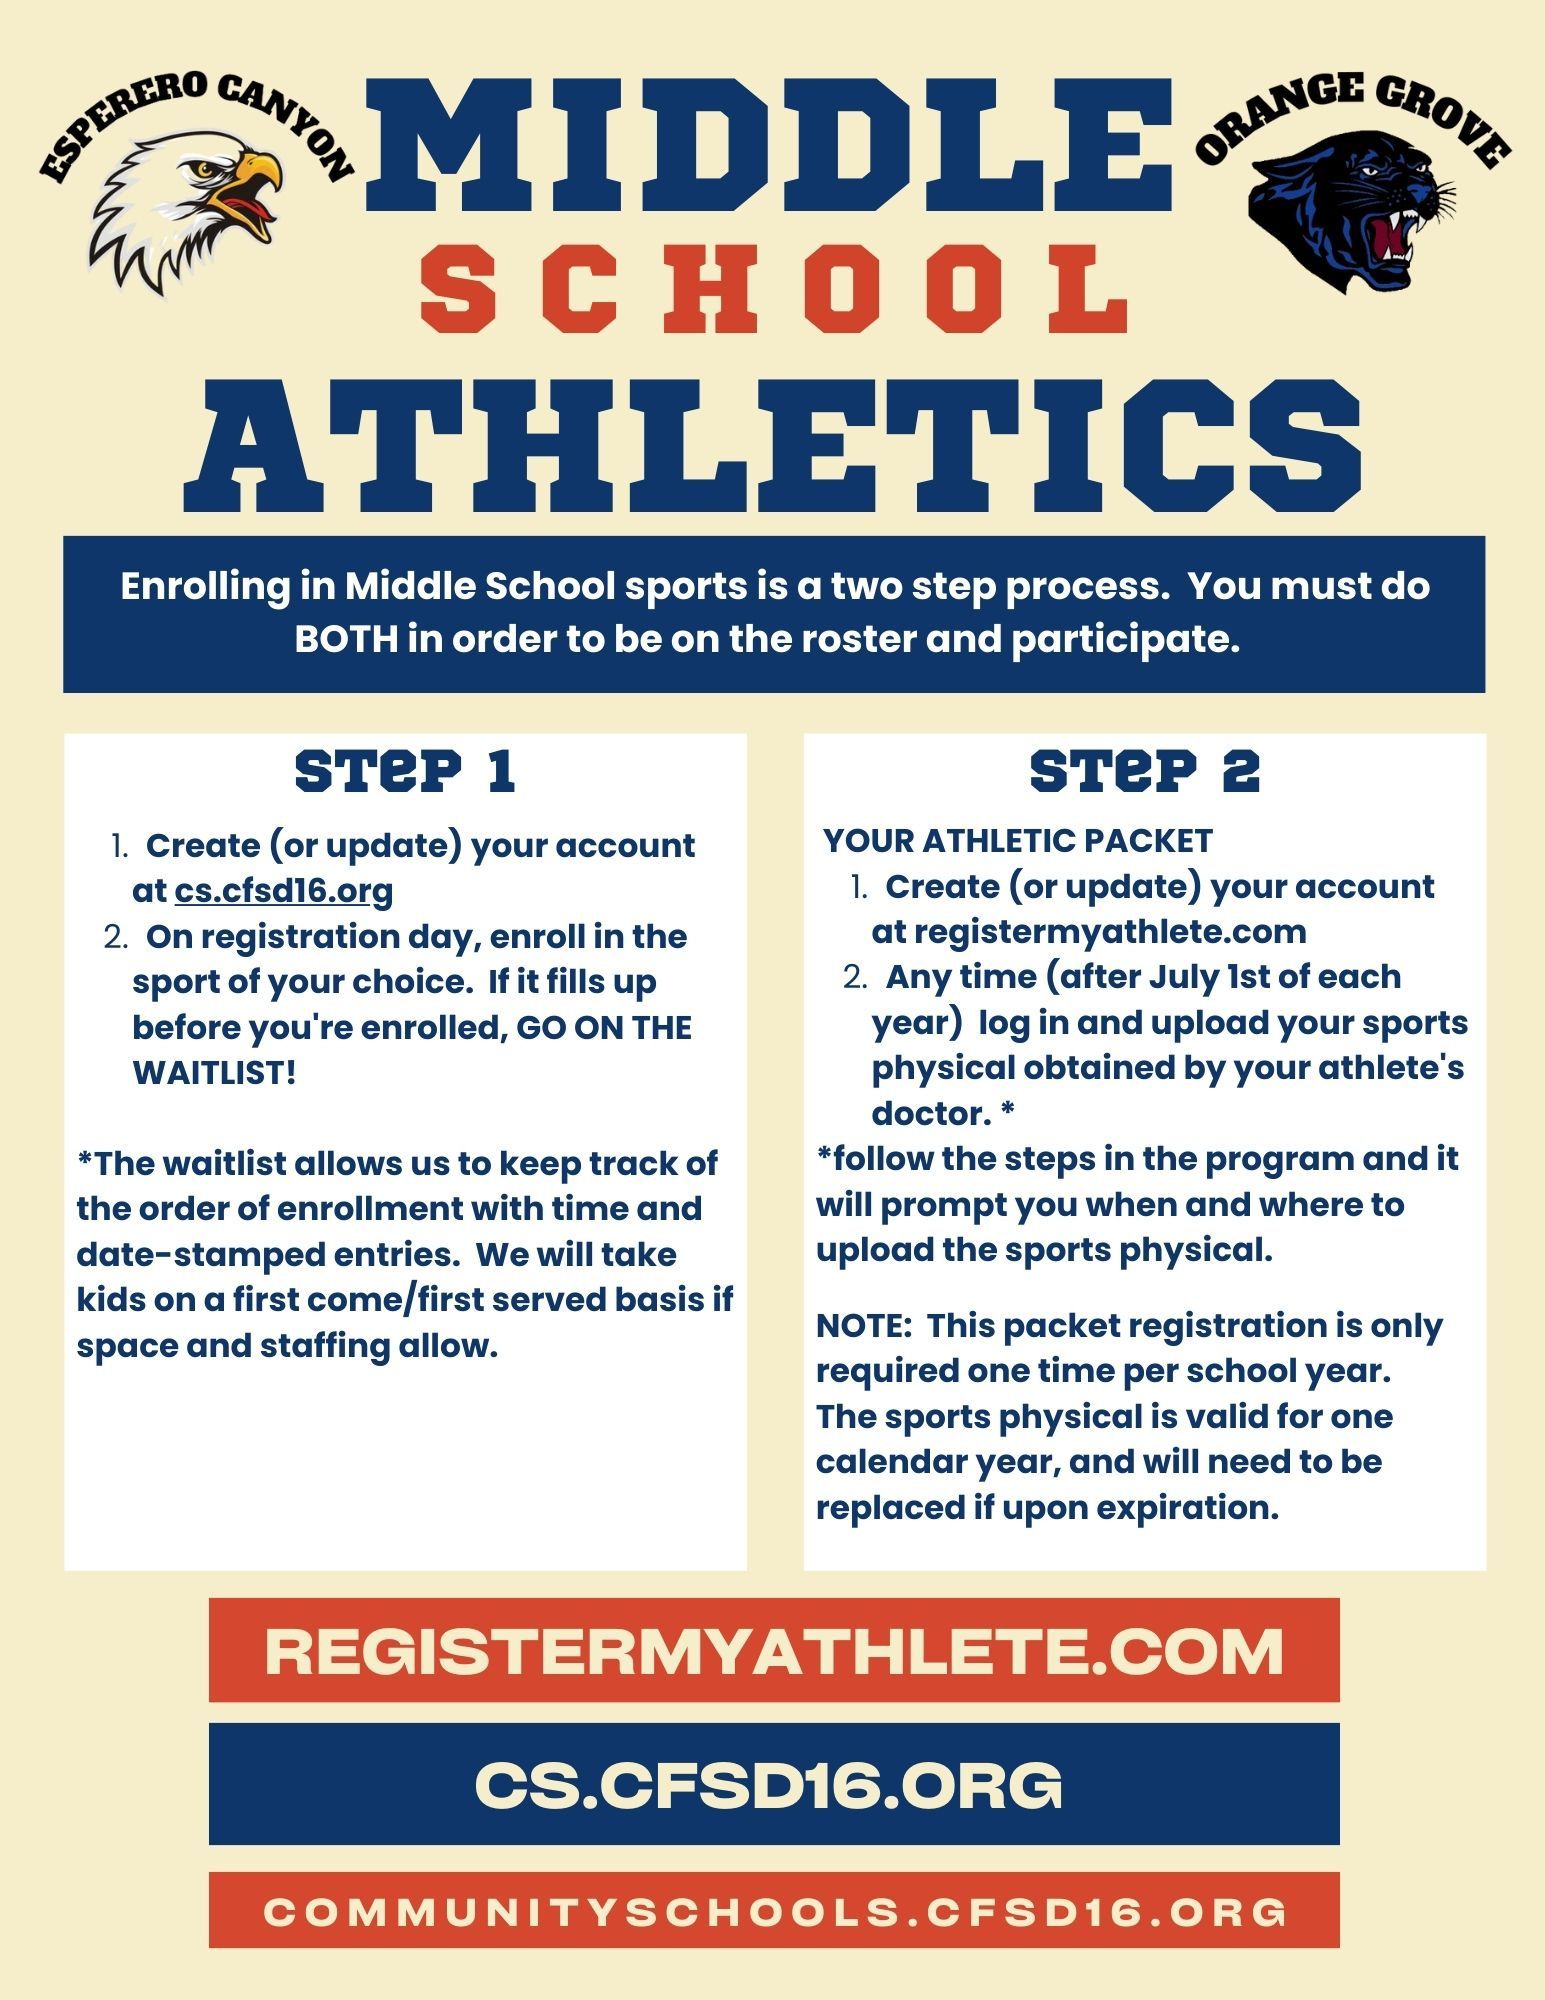 Image showing instructions for participating in middle school athletics. Step 1:   Create (or update) your account at cs.cfsd16.org   Then, on registration day, enroll in the sport of your choice.  If it fills up before you're enrolled, GO ON THE WAITLIST!	*The waitlist allows us to keep track of the order of enrollment with time and  date-stamped entries.  We will take kids on a first come/first served basis if space and staffing allow.  Step 2:  YOUR ATHLETIC PACKET -  Create (or update) your account at registermyathlete.com   Any time (after July 1st of each year)  log in and upload your sports physical obtained by your athlete's doctor. *  *Follow the steps in the program and it will prompt you when and where to upload the sports physical.   NOTE:  This packet registration is only  required one time per school year.   The sports physical is valid for one calendar year, and will need to be replaced upon expiration.  Enroll at cs.cfsd16.org  Upload your athletic packet at registermyathlete.com  More info at communityschools.cfsd16.org  Questions?  Call 520-209-7562